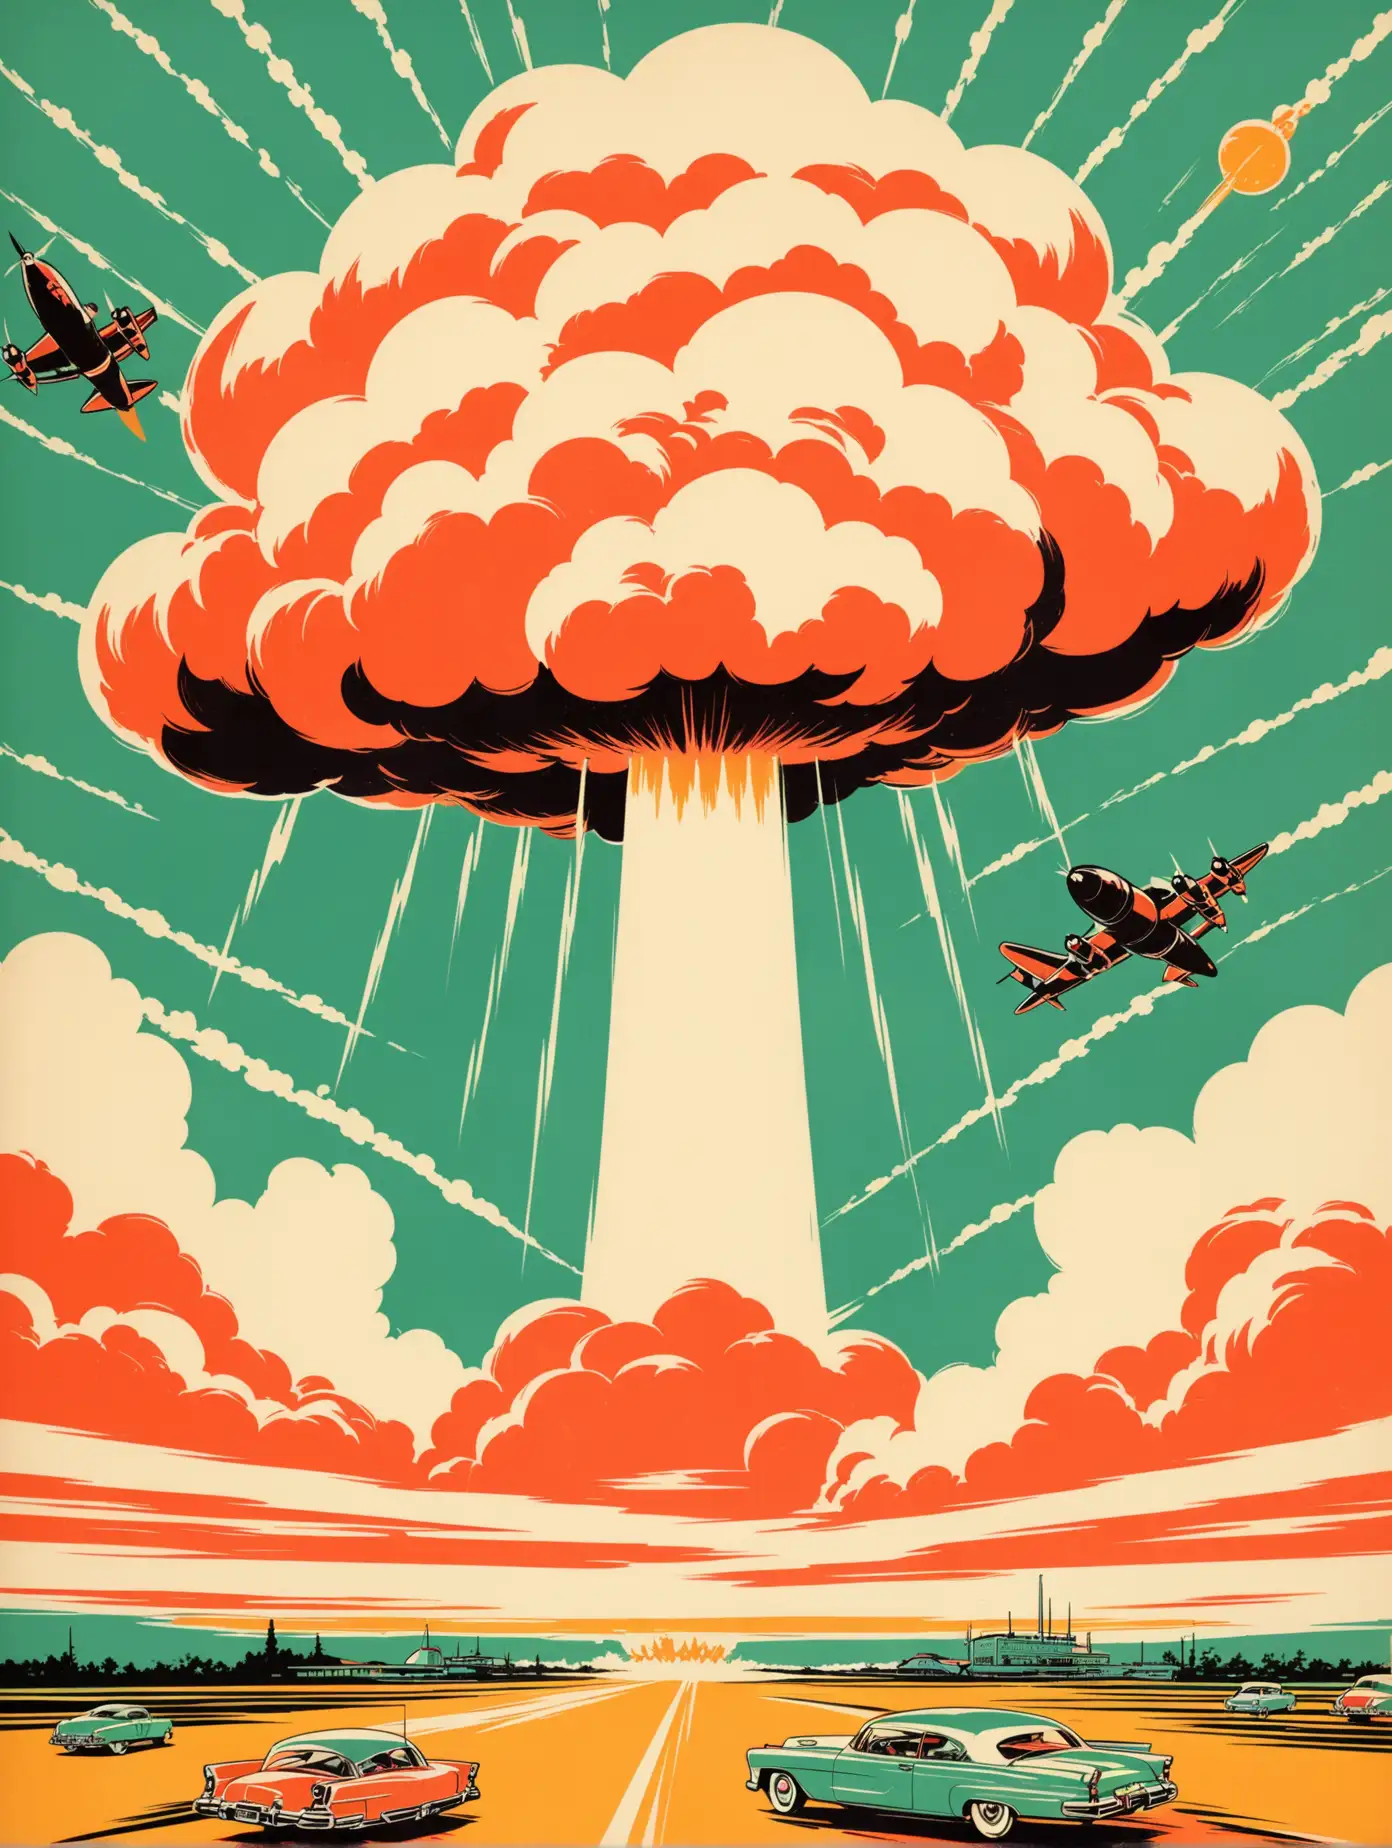 Nostalgic MidCentury Modern Scene with Atomic Cocktails and Bomb Clouds